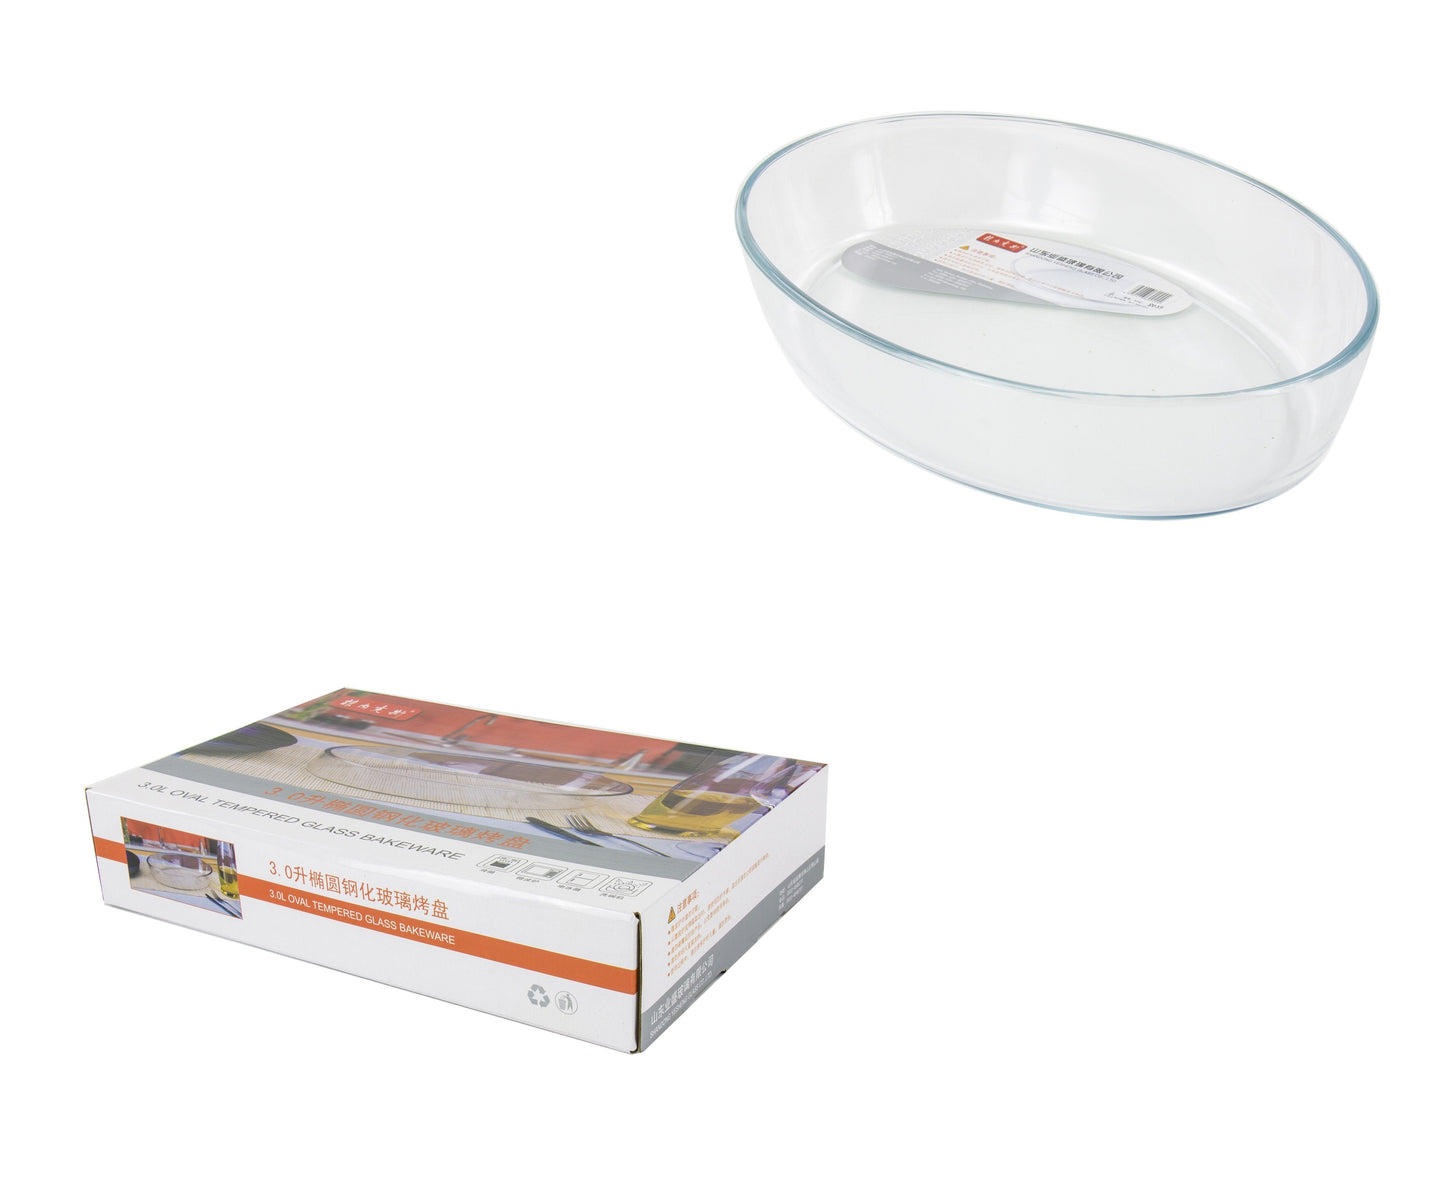 Glassware Roaster Tempered Oval Baking Cooking Tray Dish 3 Litre 35 x 24 x 6.5cm 8039 (Parcel Rate)